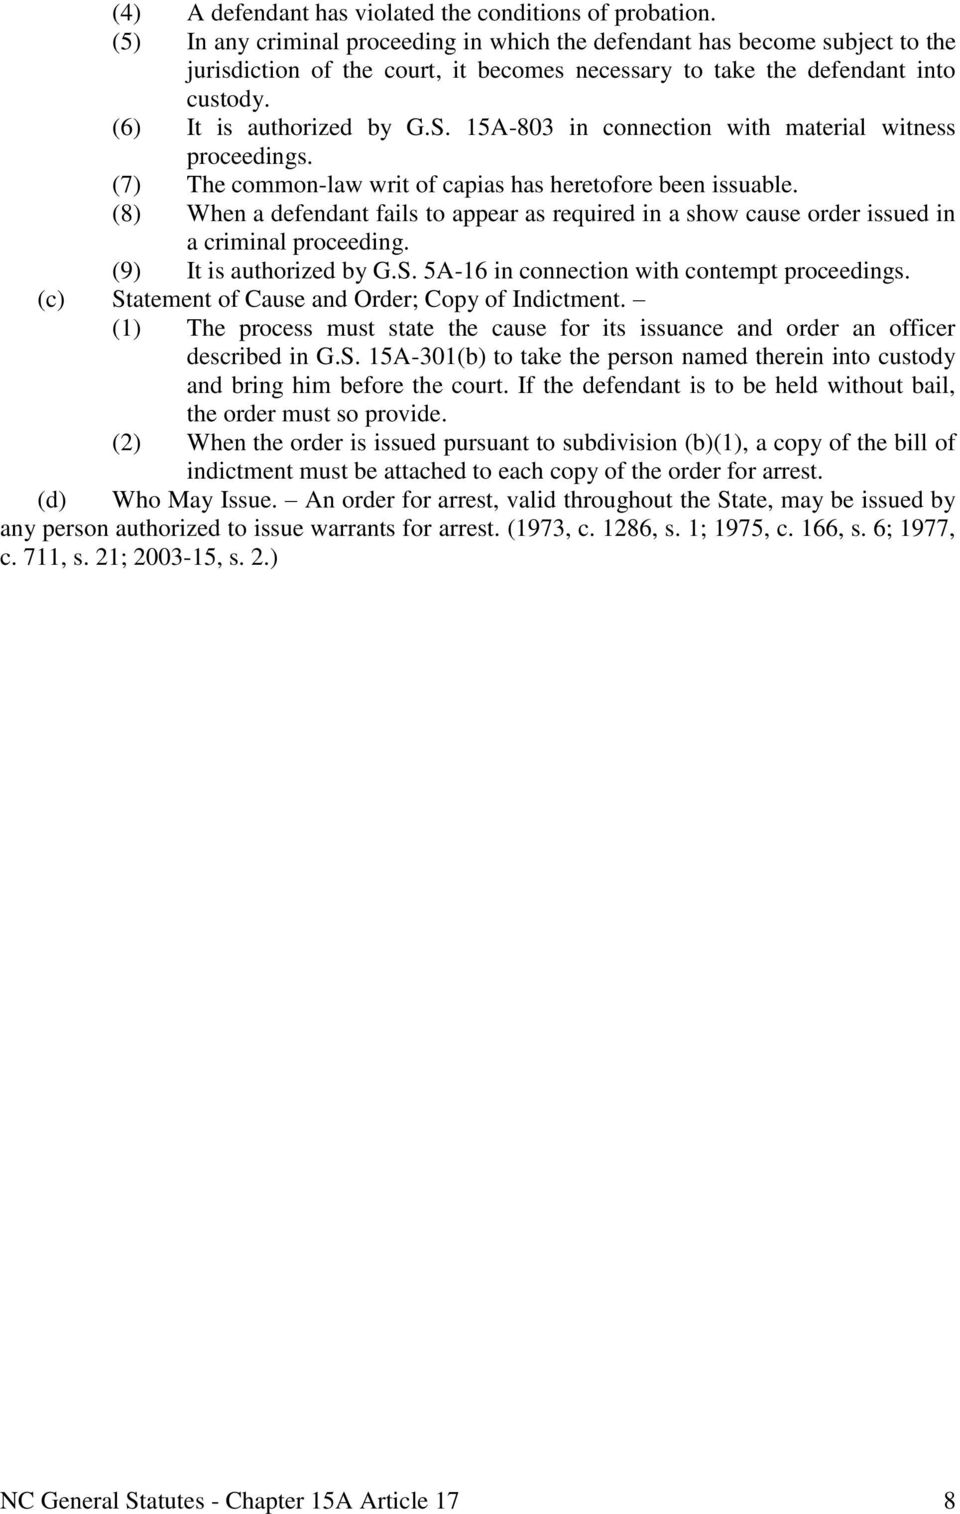 15A-803 in connection with material witness proceedings. (7) The common-law writ of capias has heretofore been issuable.